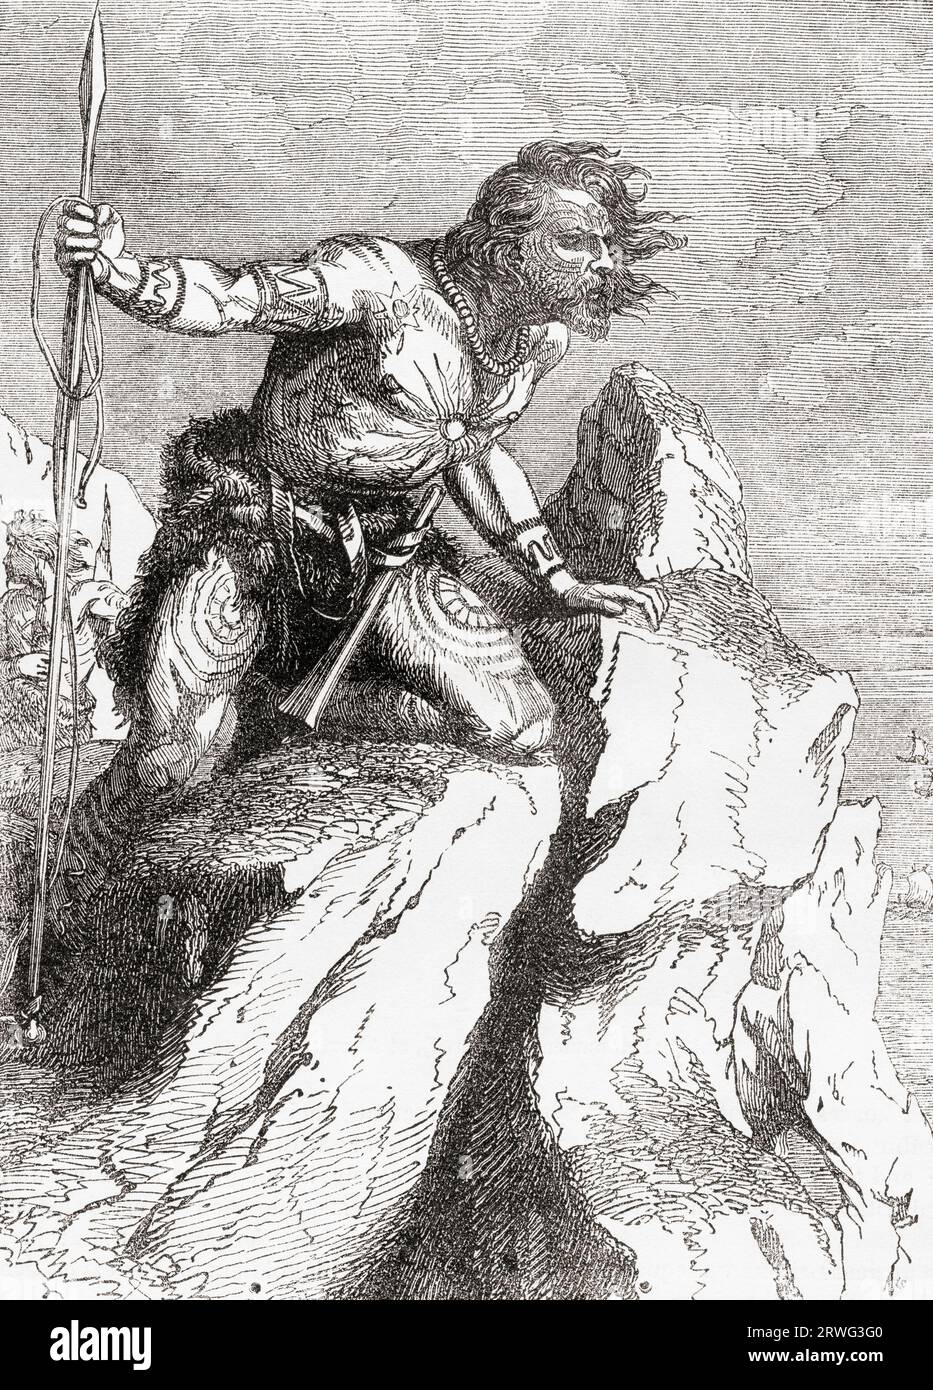 A tattooed Caledonian or Pict warrior.  From Cassell's Illustrated History of England, published 1857. Stock Photo